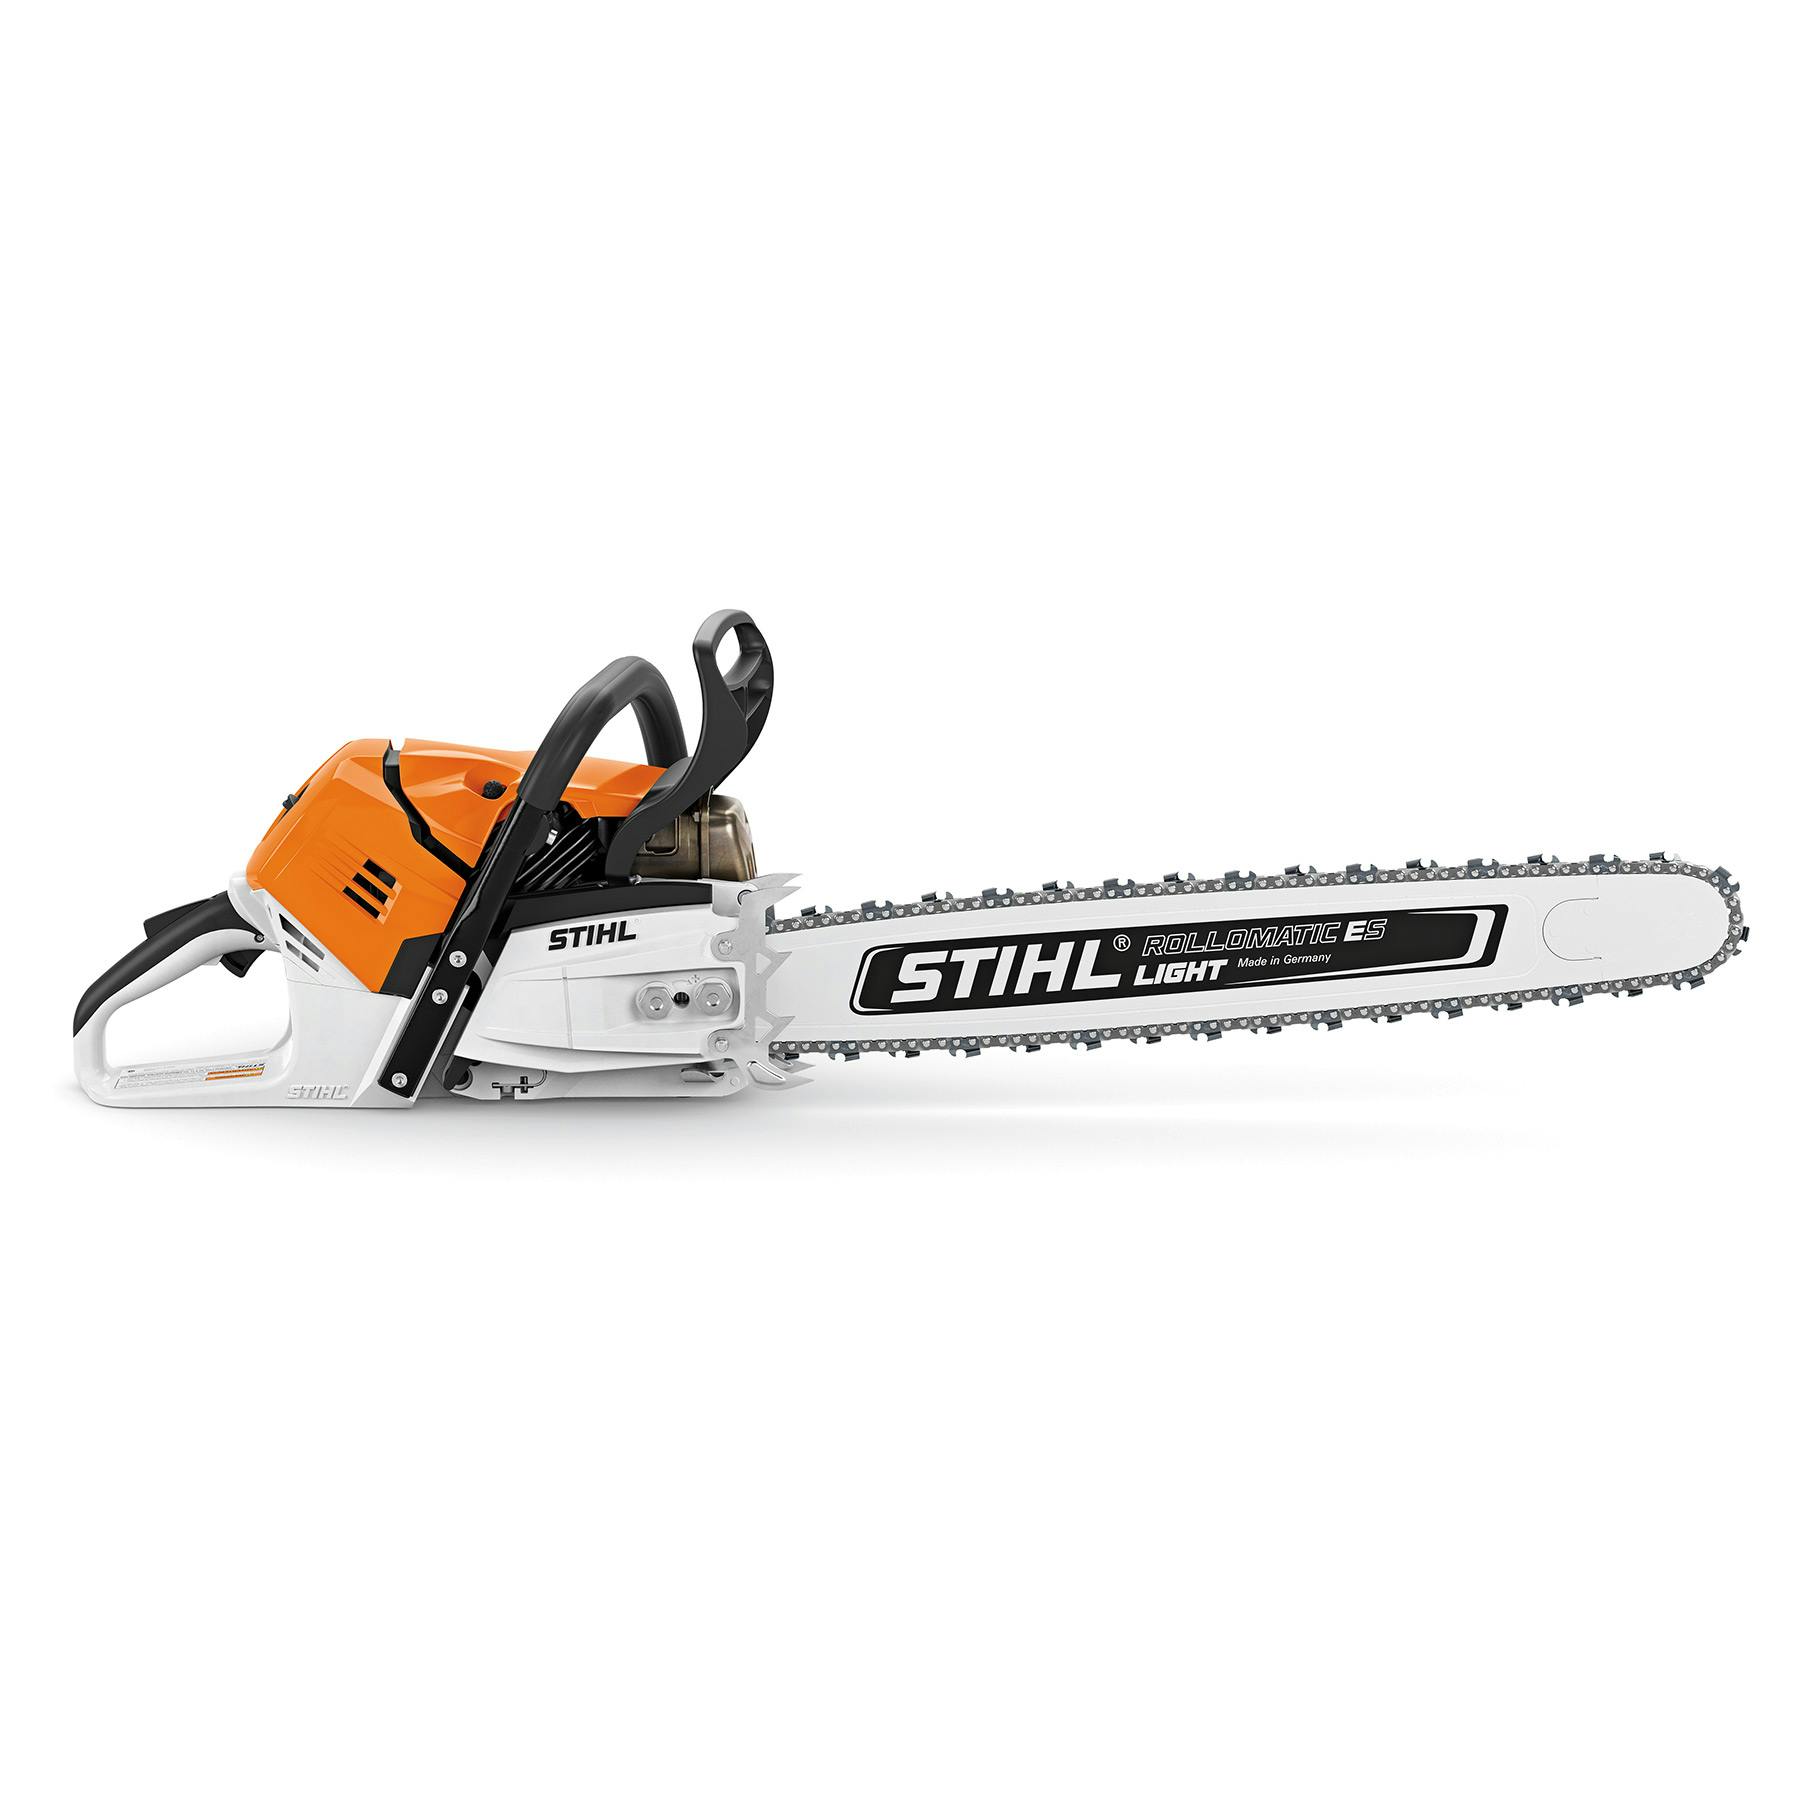 MS 500i, Chainsaws